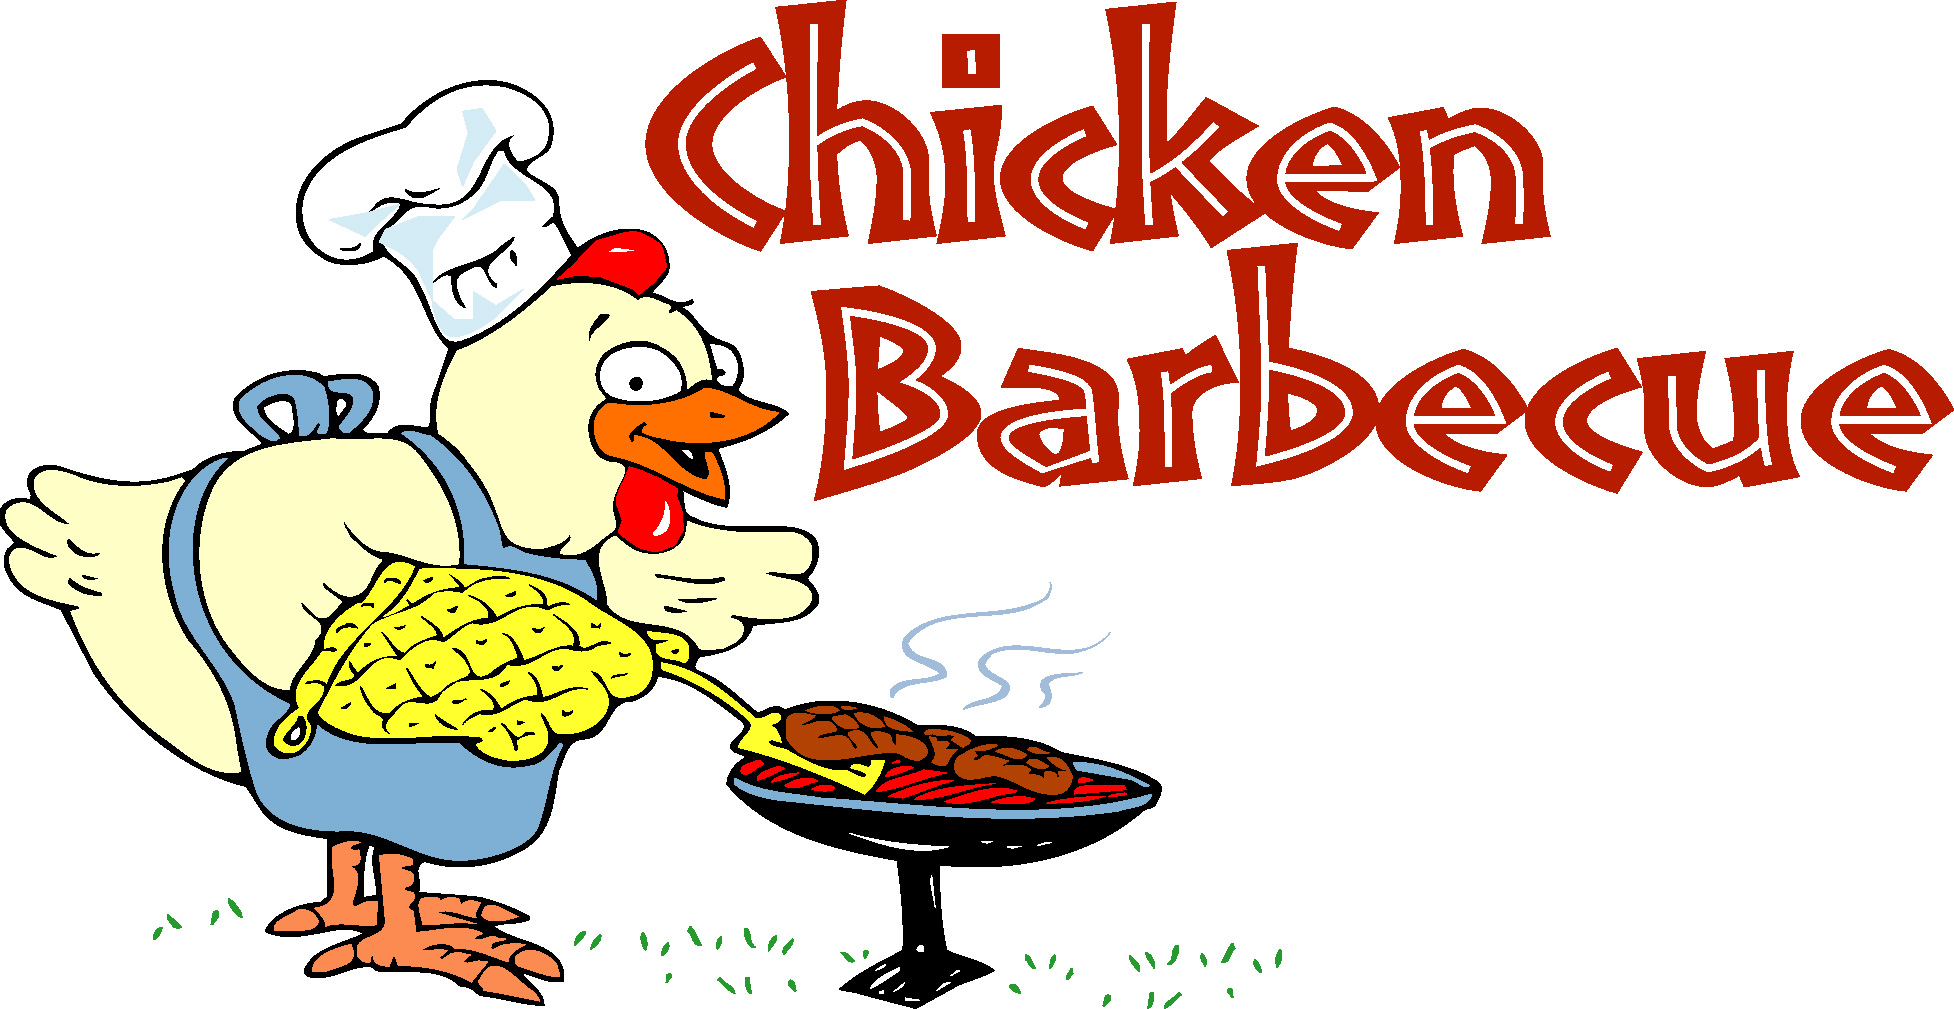 Chicken Dinner Clipart | Clipart Panda - Free Clipart Images